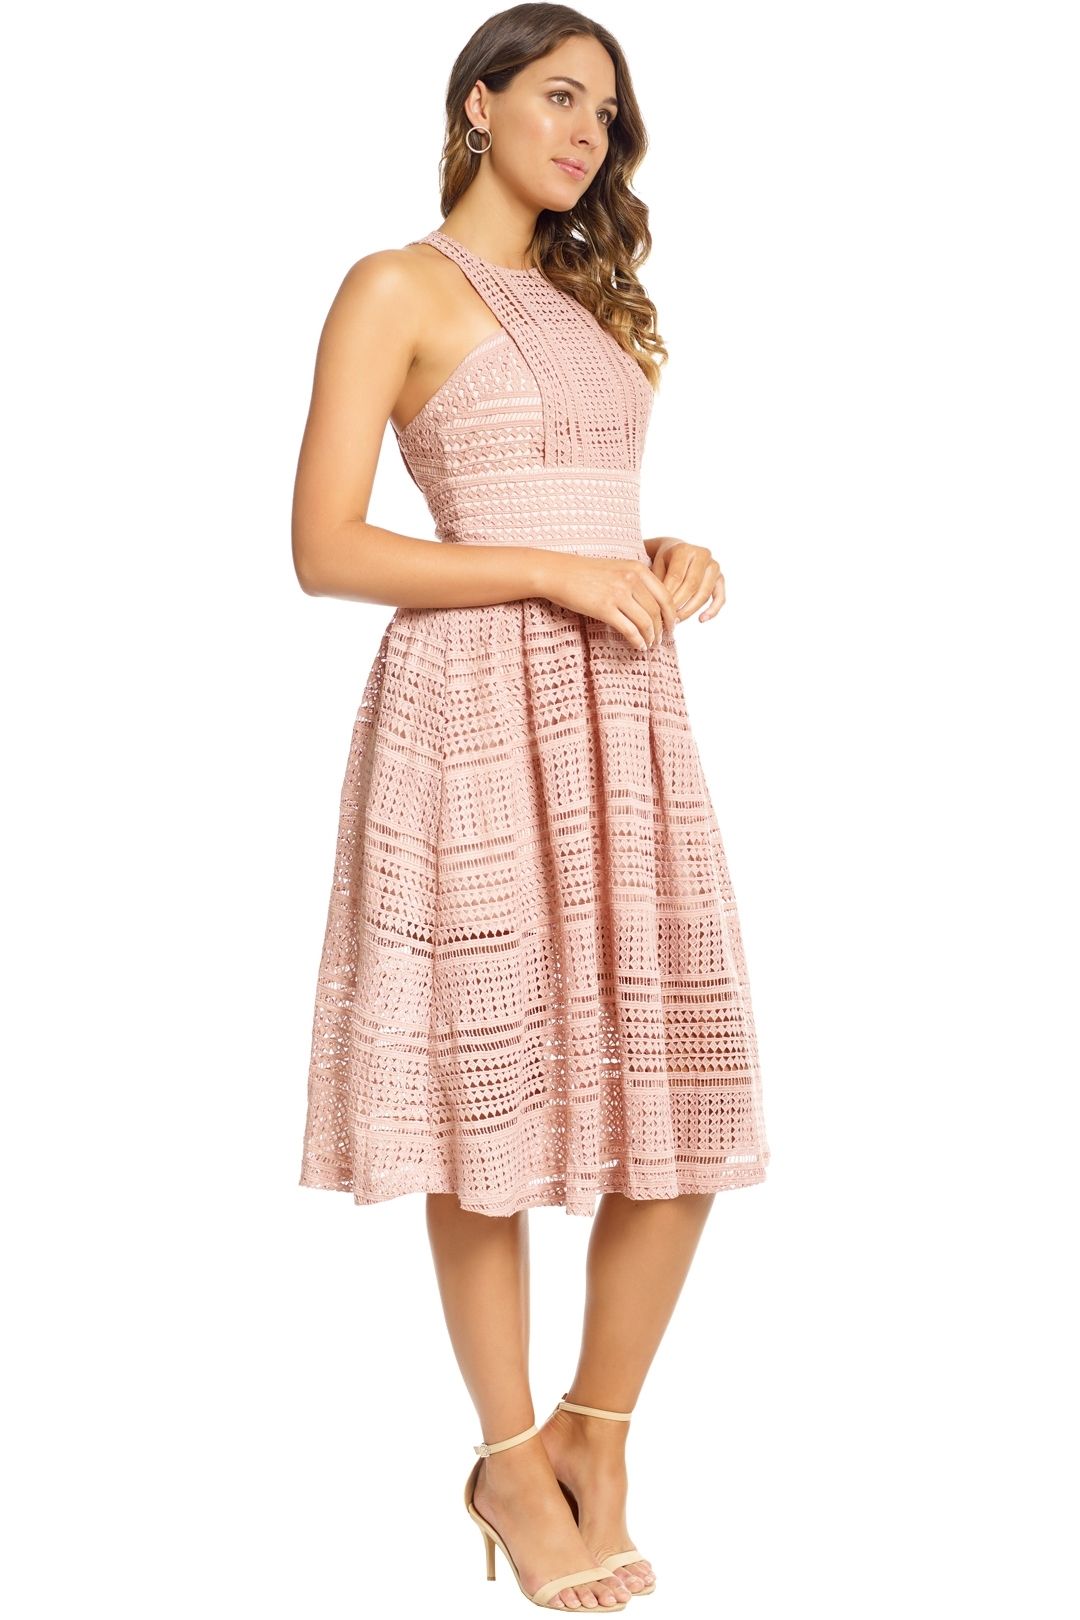 Grace and Hart - Allure Floaty Dress - Blush - Side